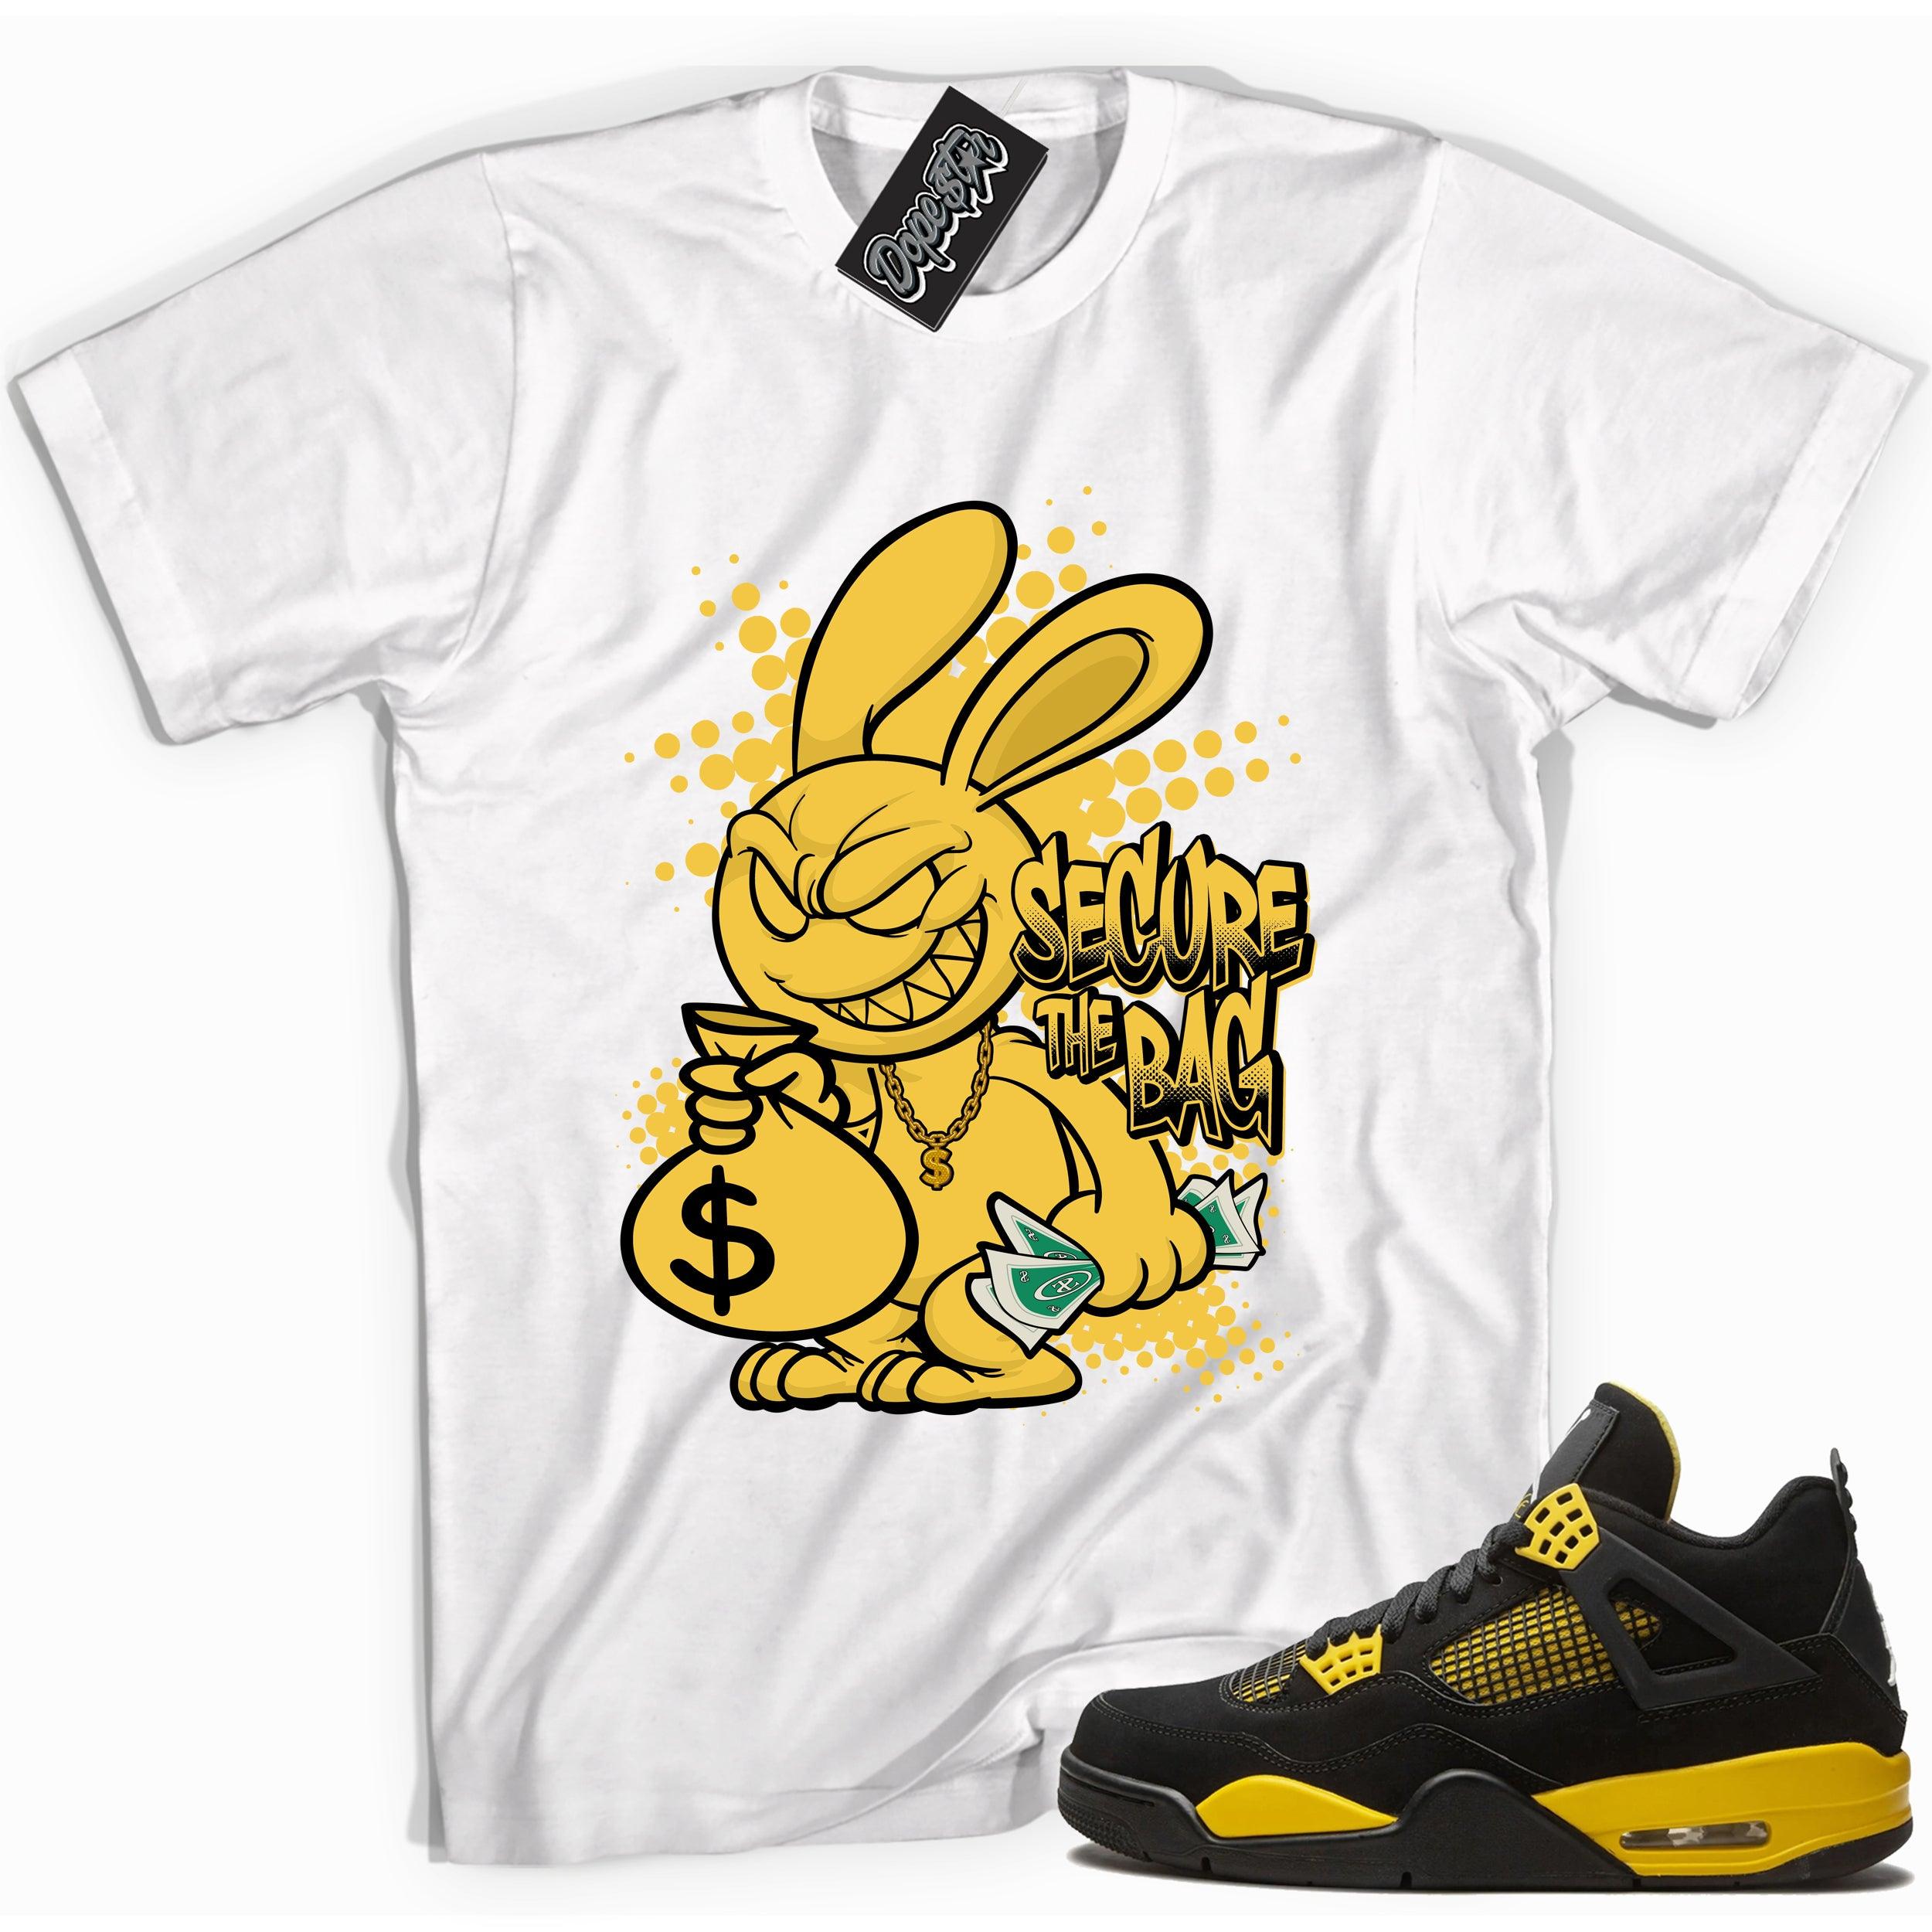 Cool white graphic tee with 'secure the bag' print, that perfectly matches Air Jordan 4 Thunder sneakers